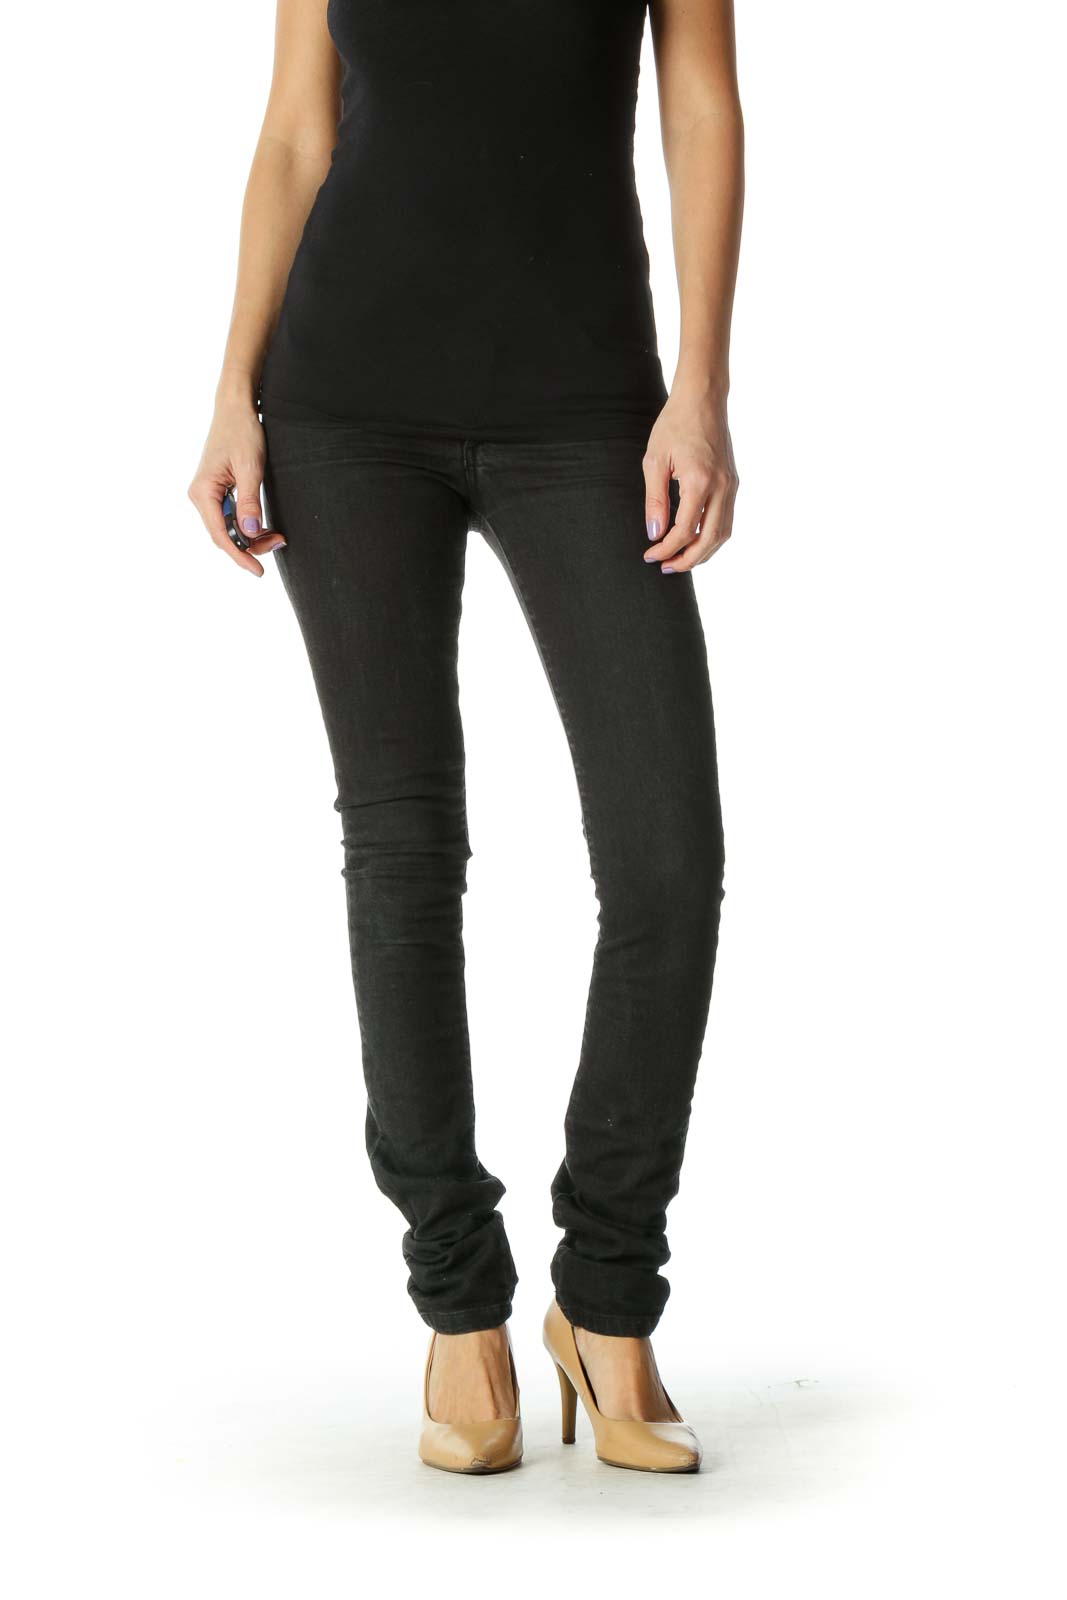 Black Solid Casual Jeans Front